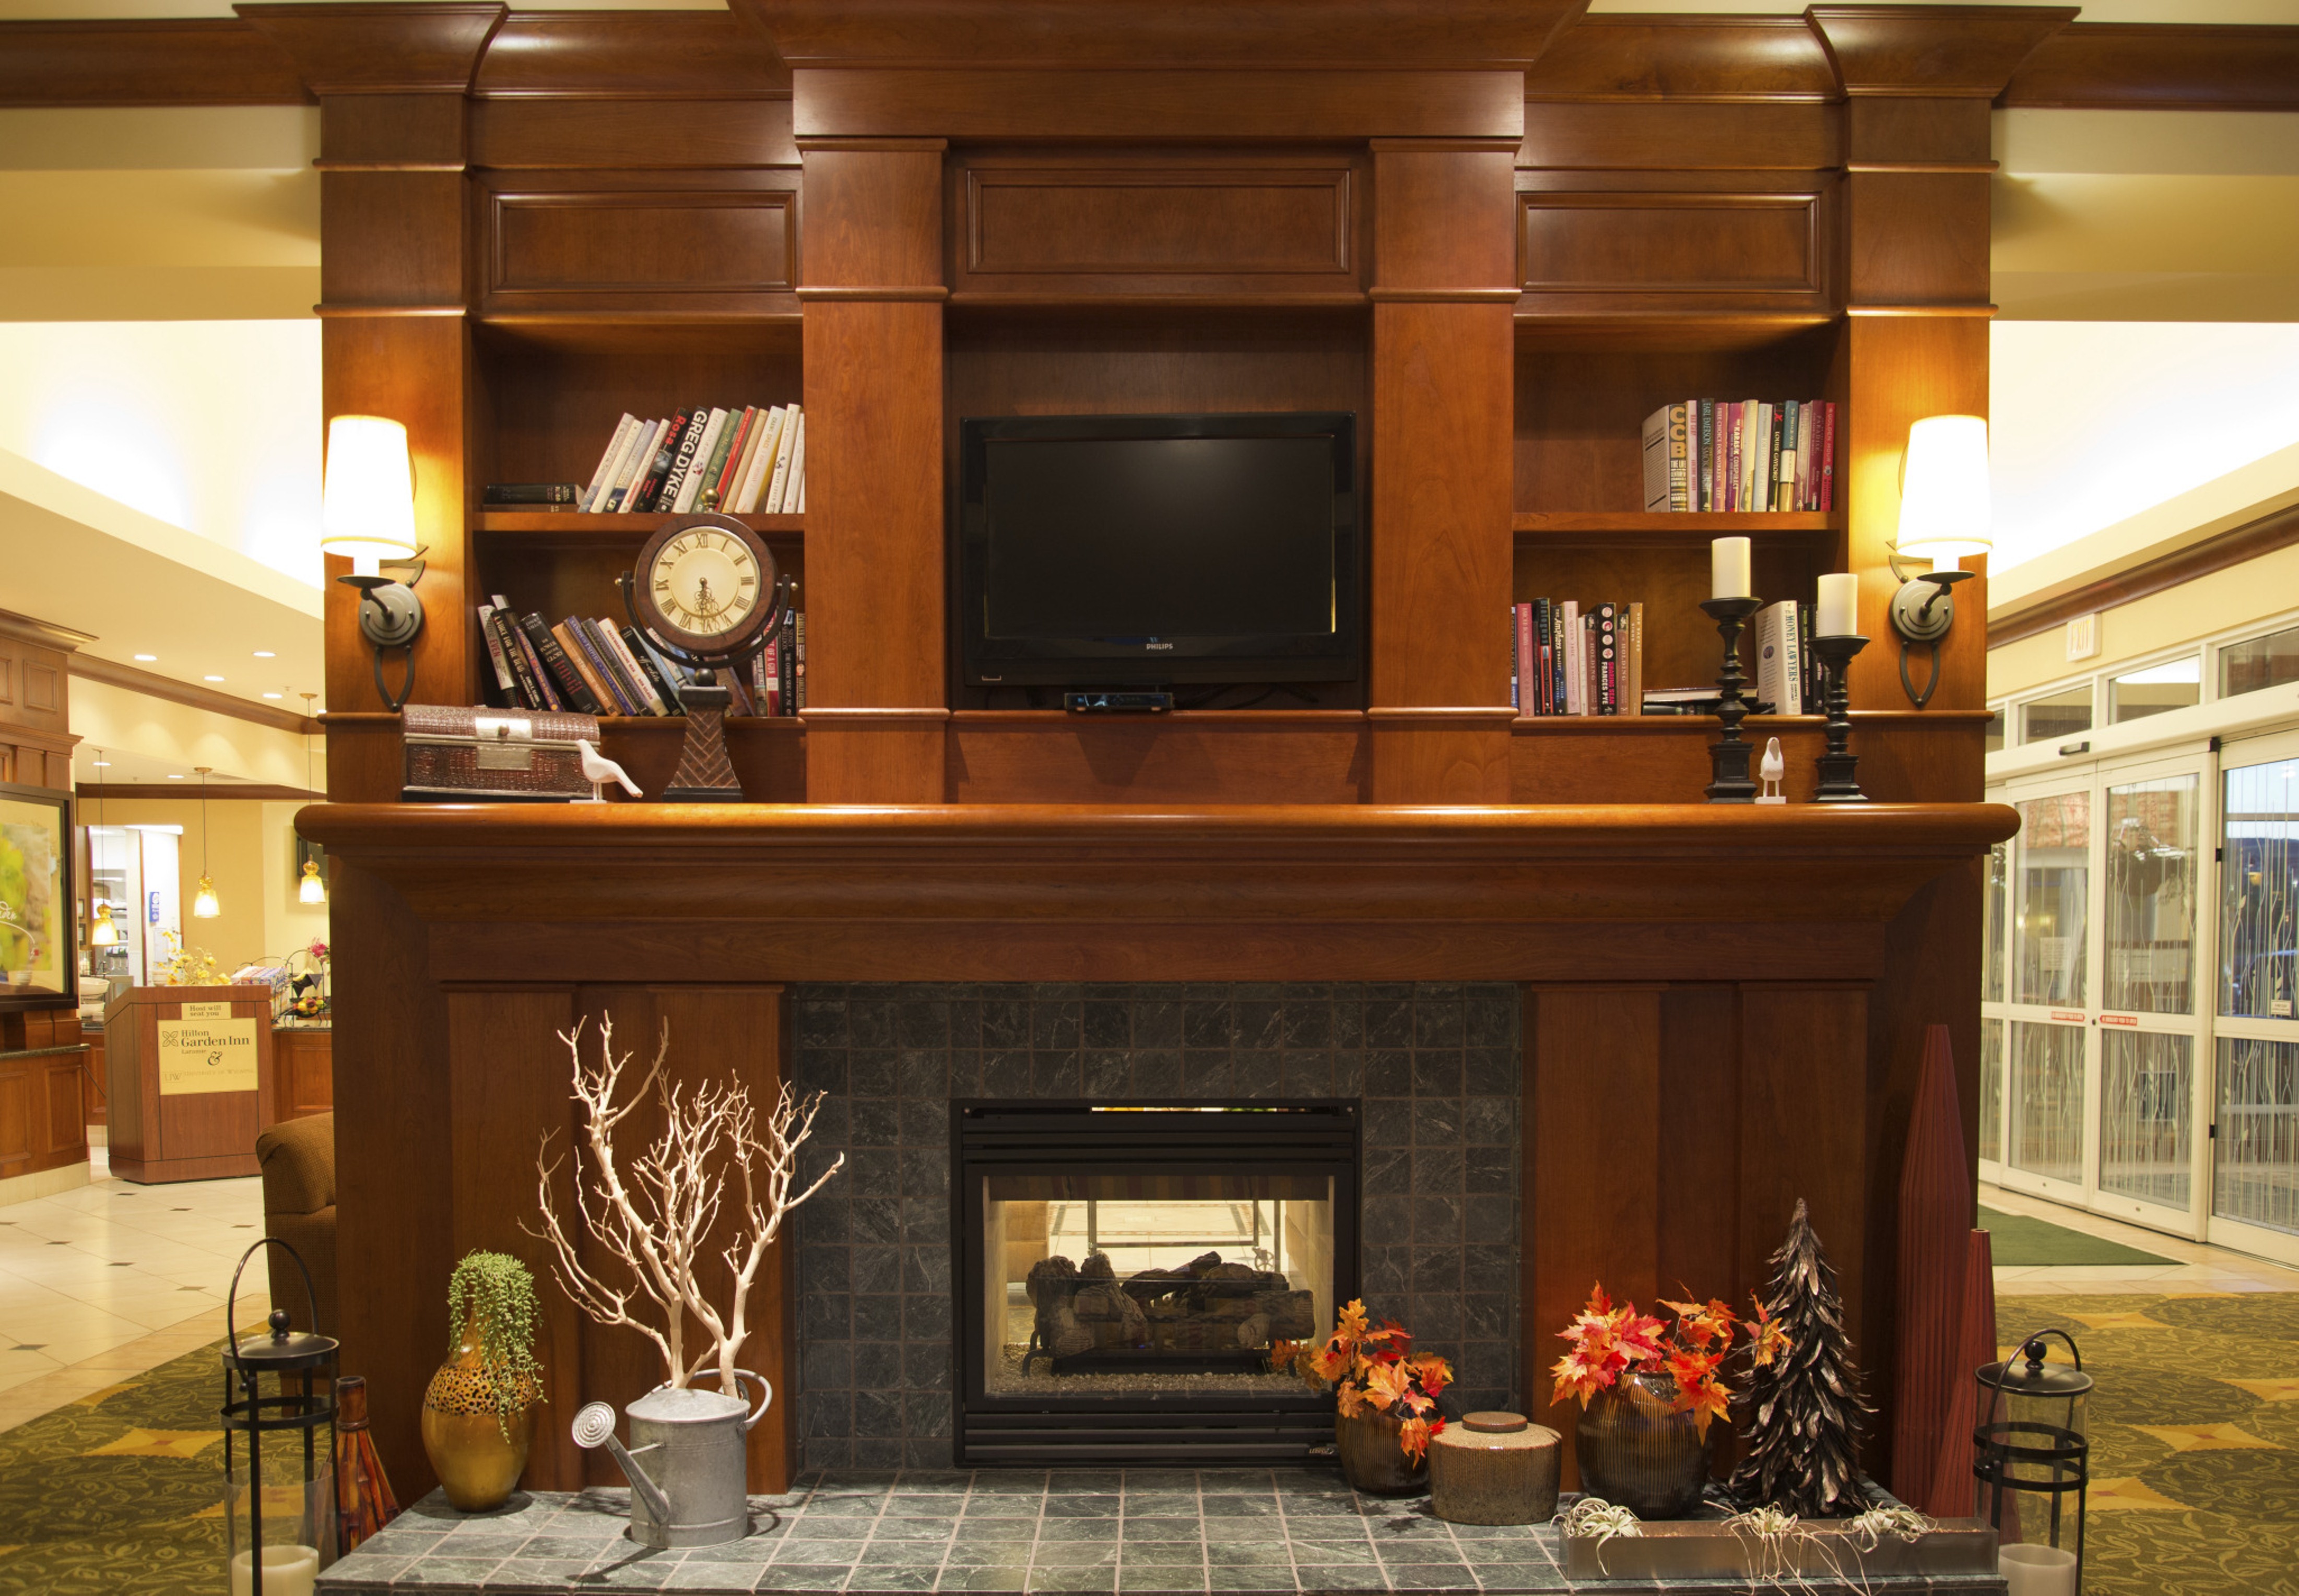 Wood Cabinetry with TV, Lights, Decor and Fireplace in Lobby